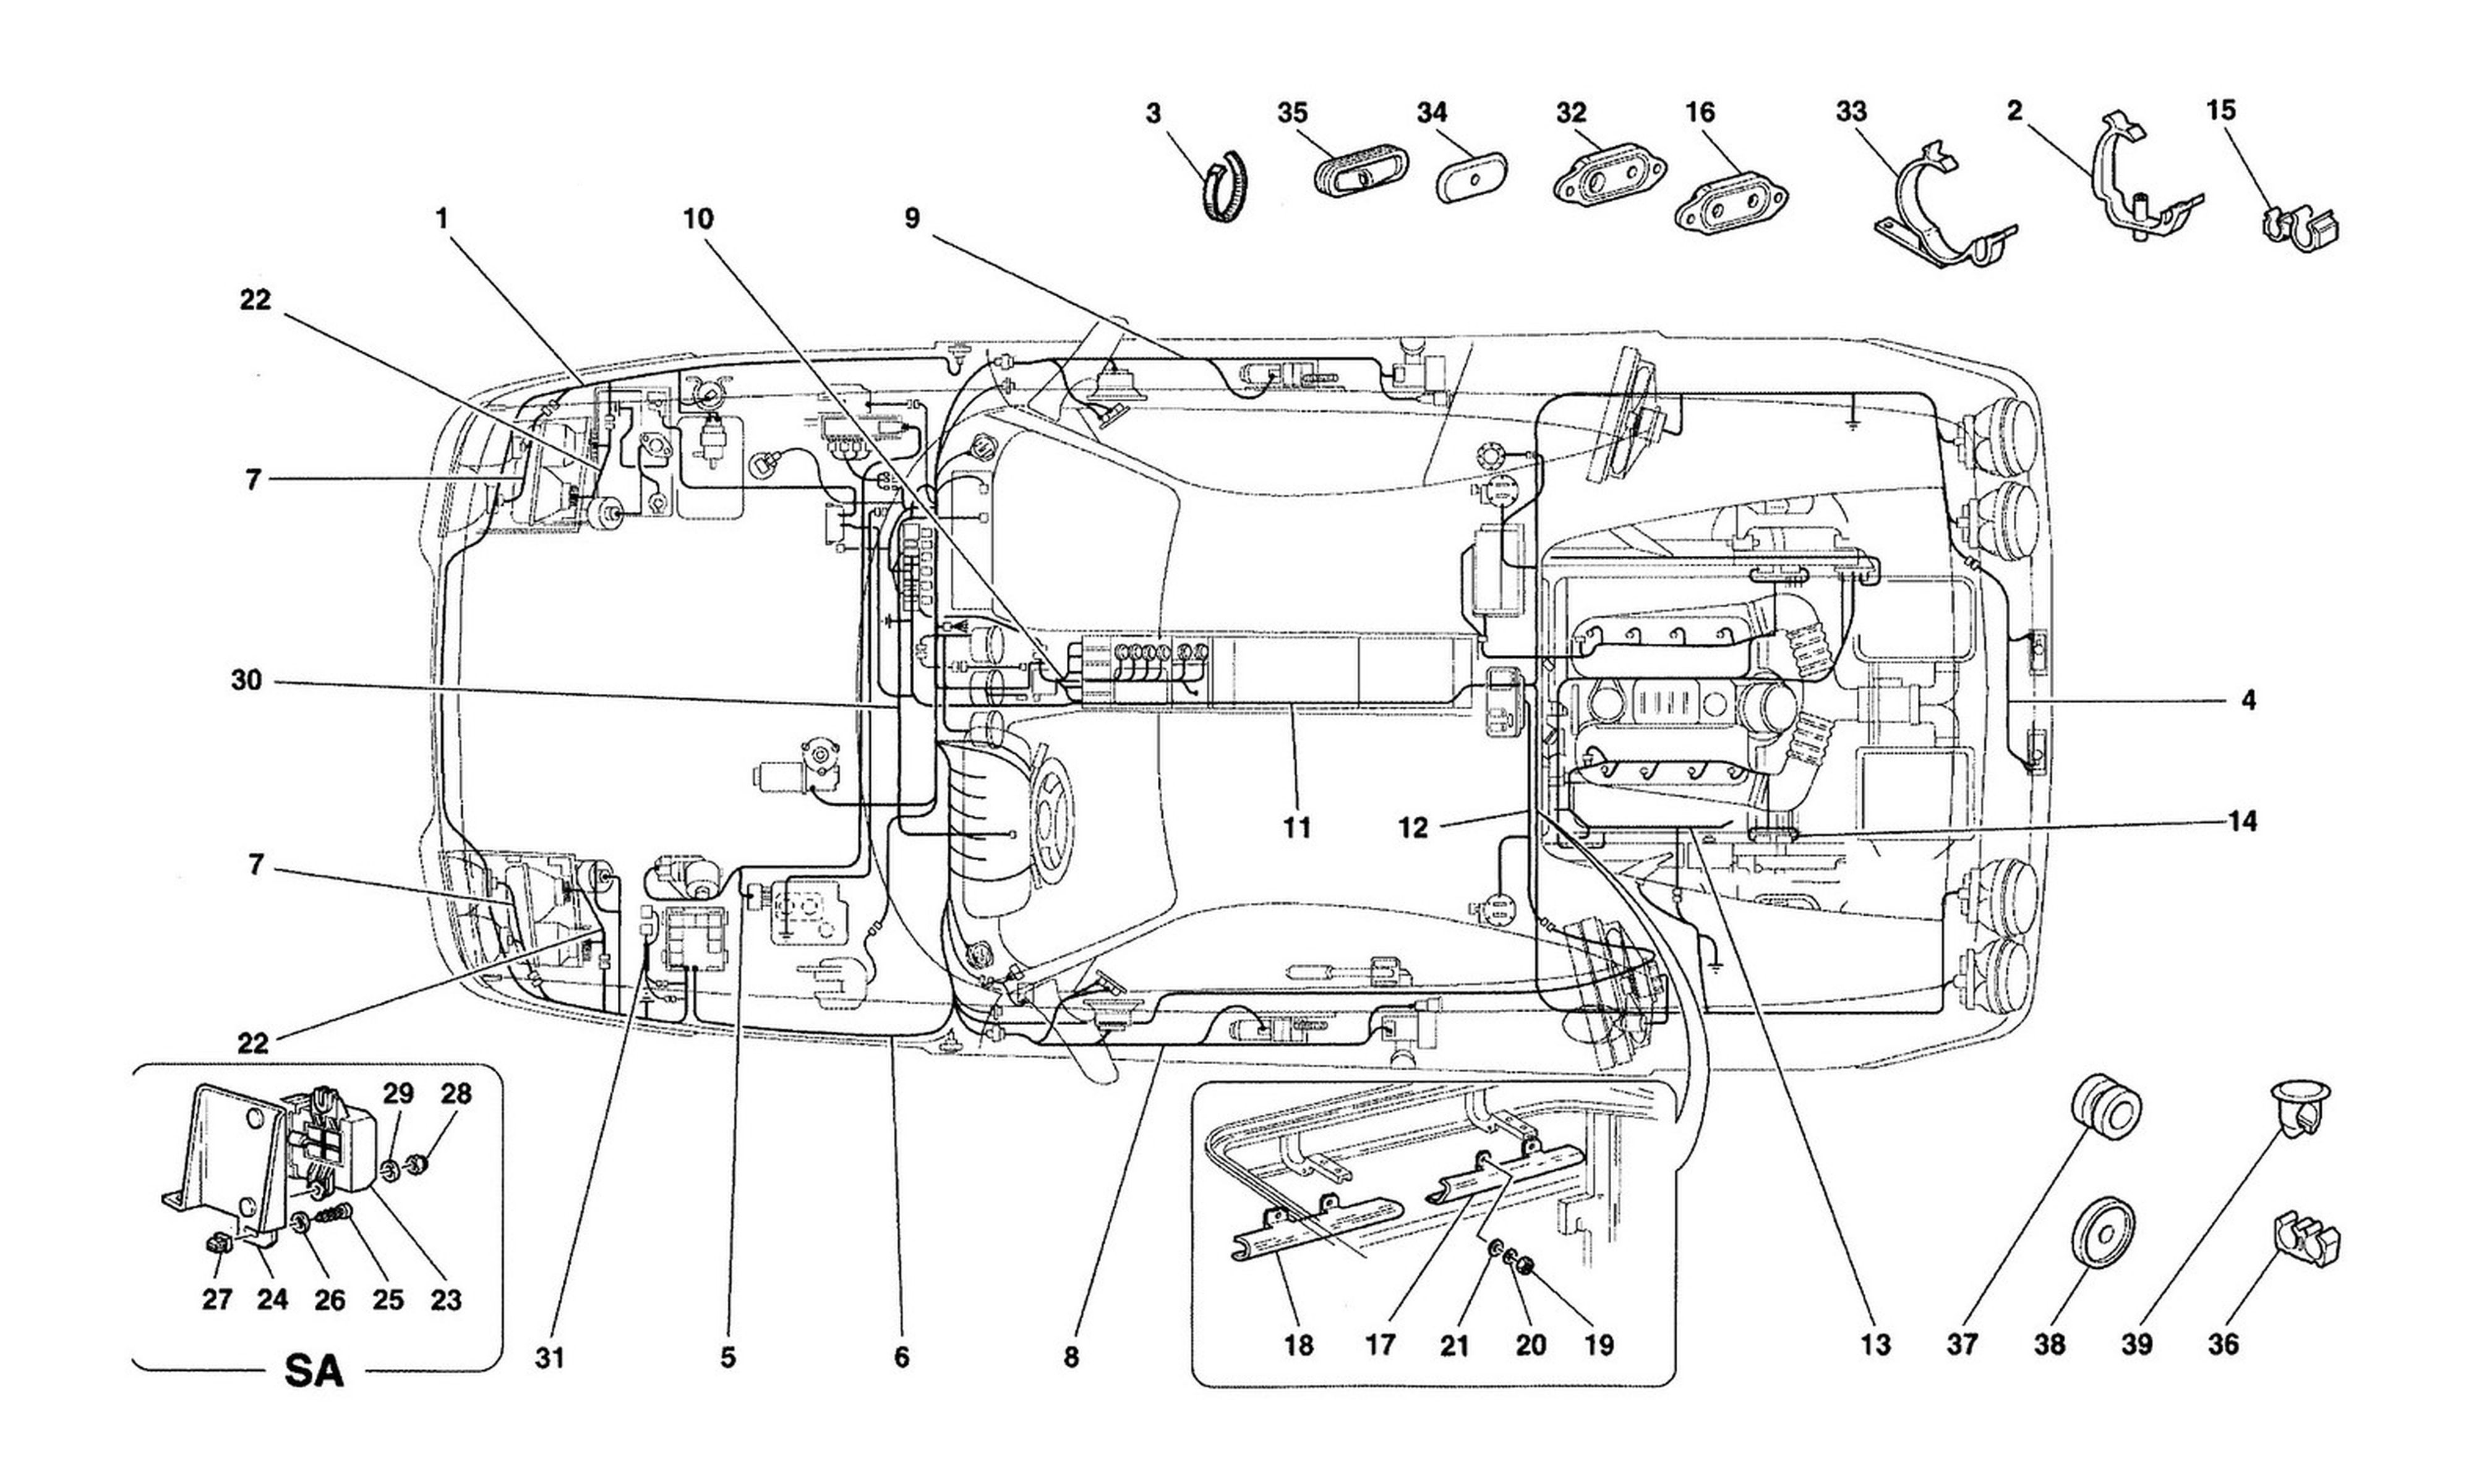 Schematic: Electrical System -Not For Abs Bosch And 355 F1 Cars-